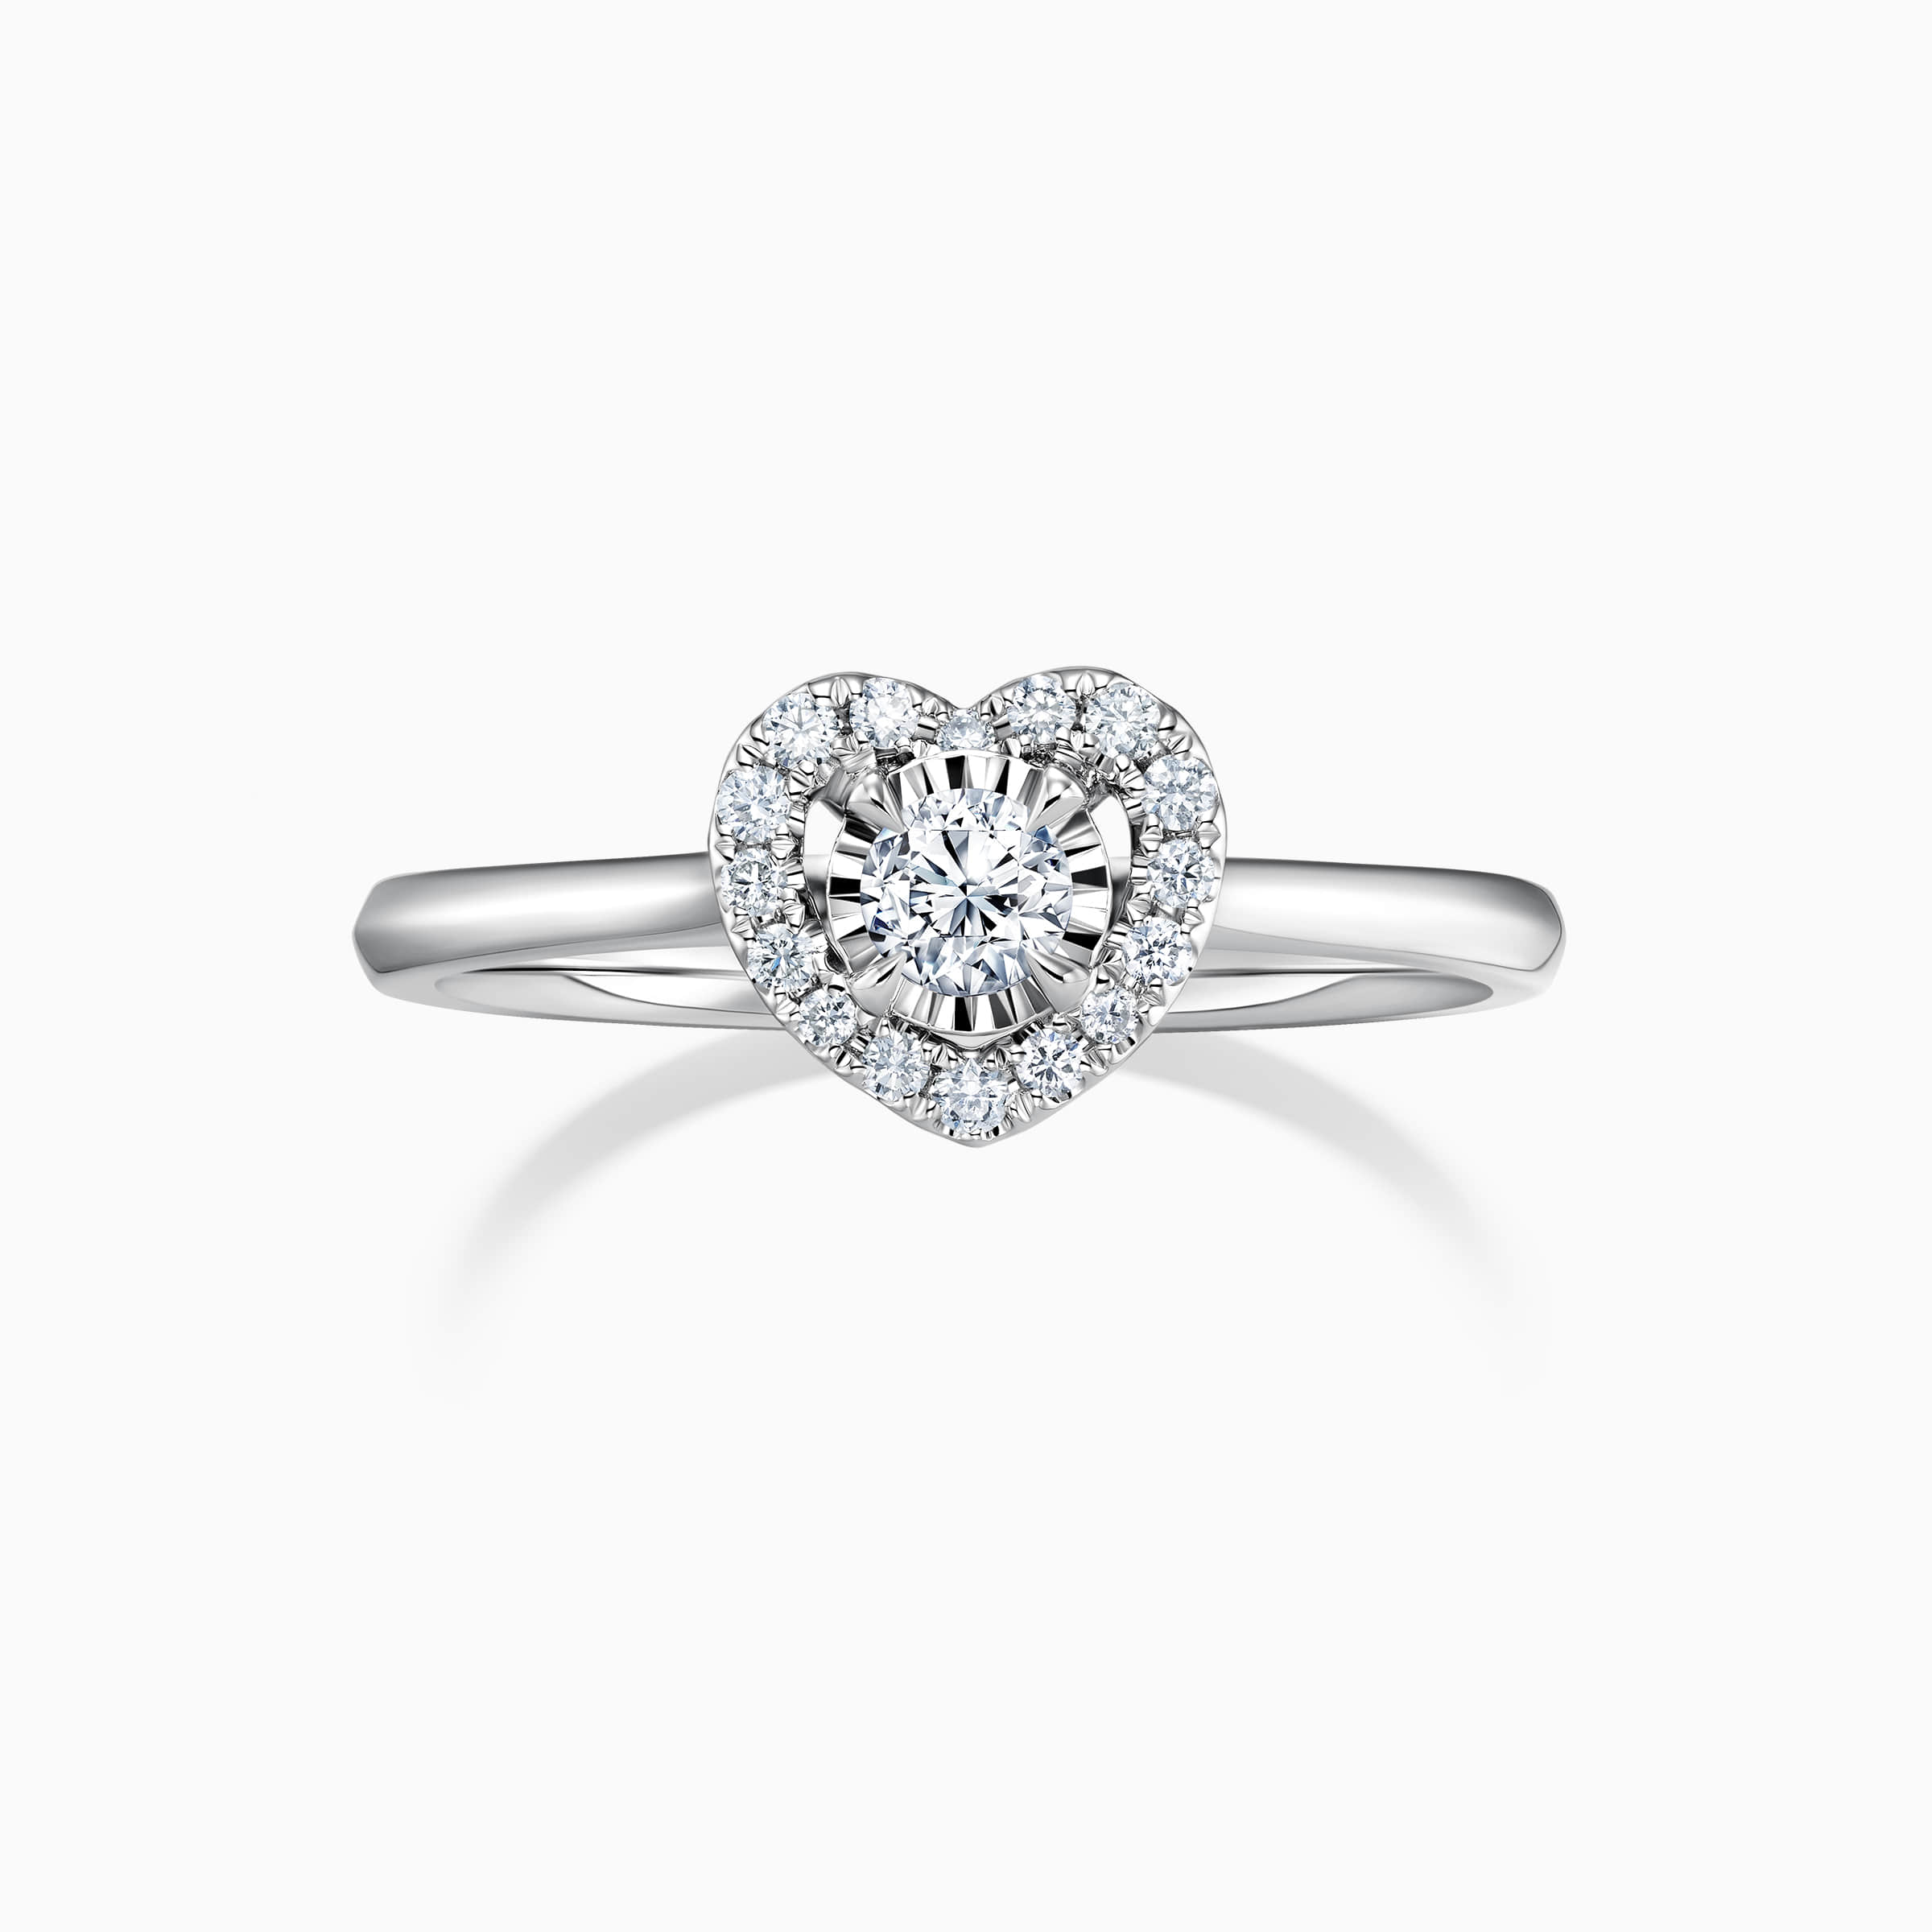 darry ring heart halo engagement ring front view